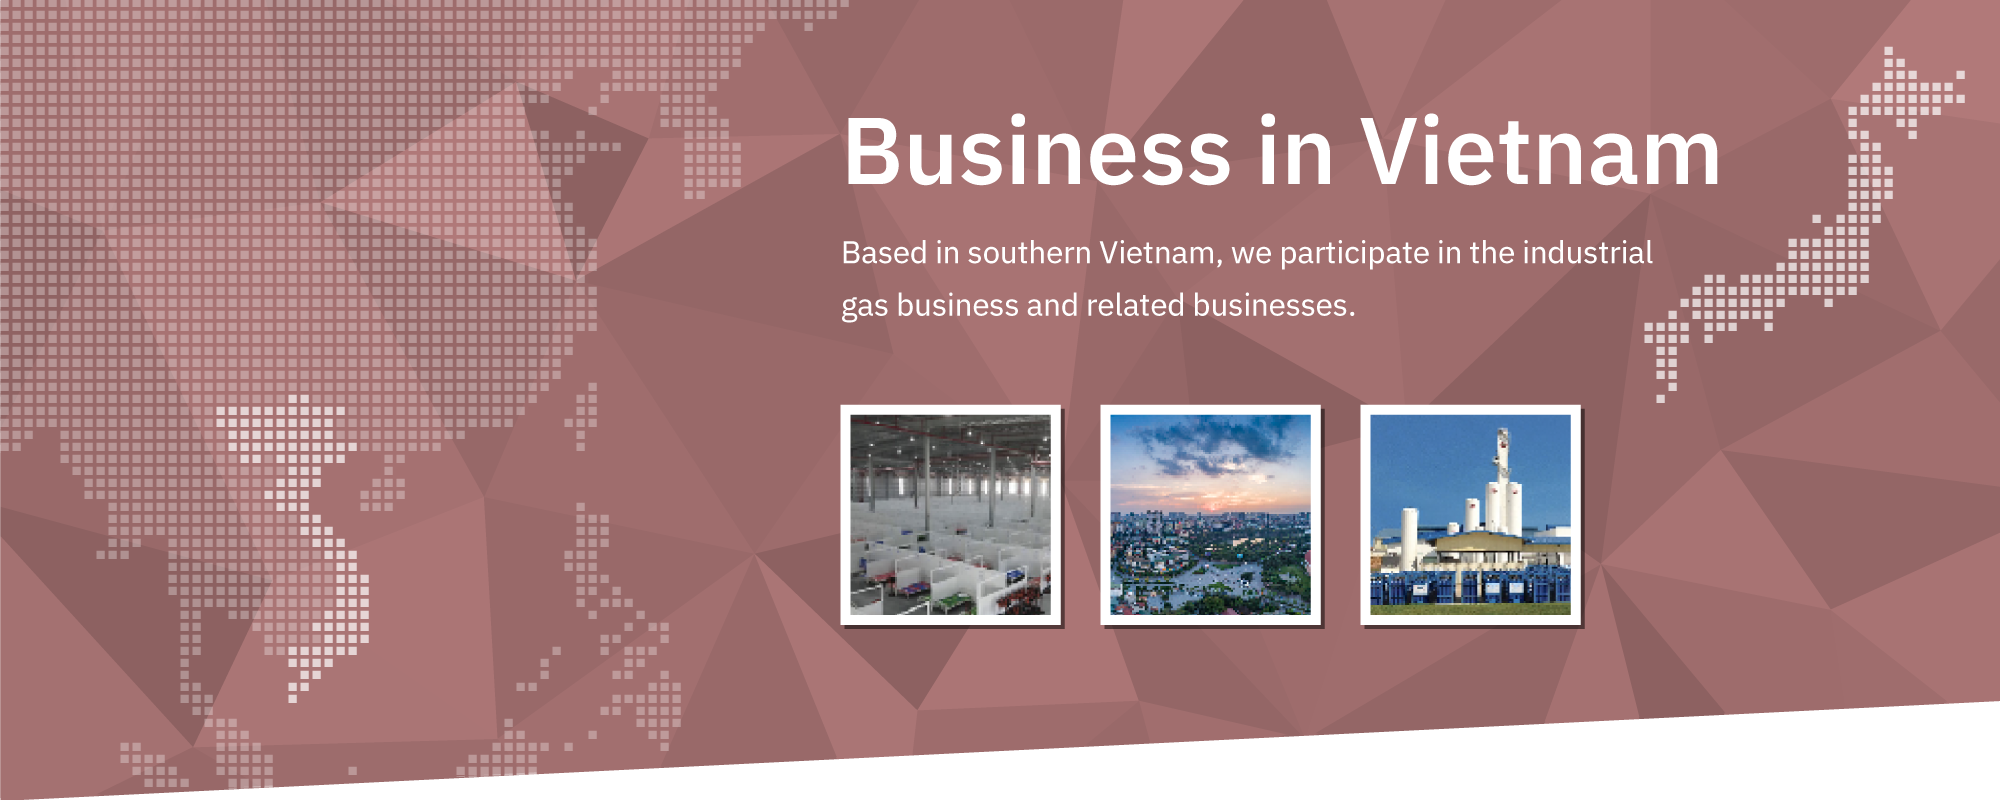 Business in Vietnam: Based in southern Vietnam, we are operating an industrial gas business and other peripheral businesses.